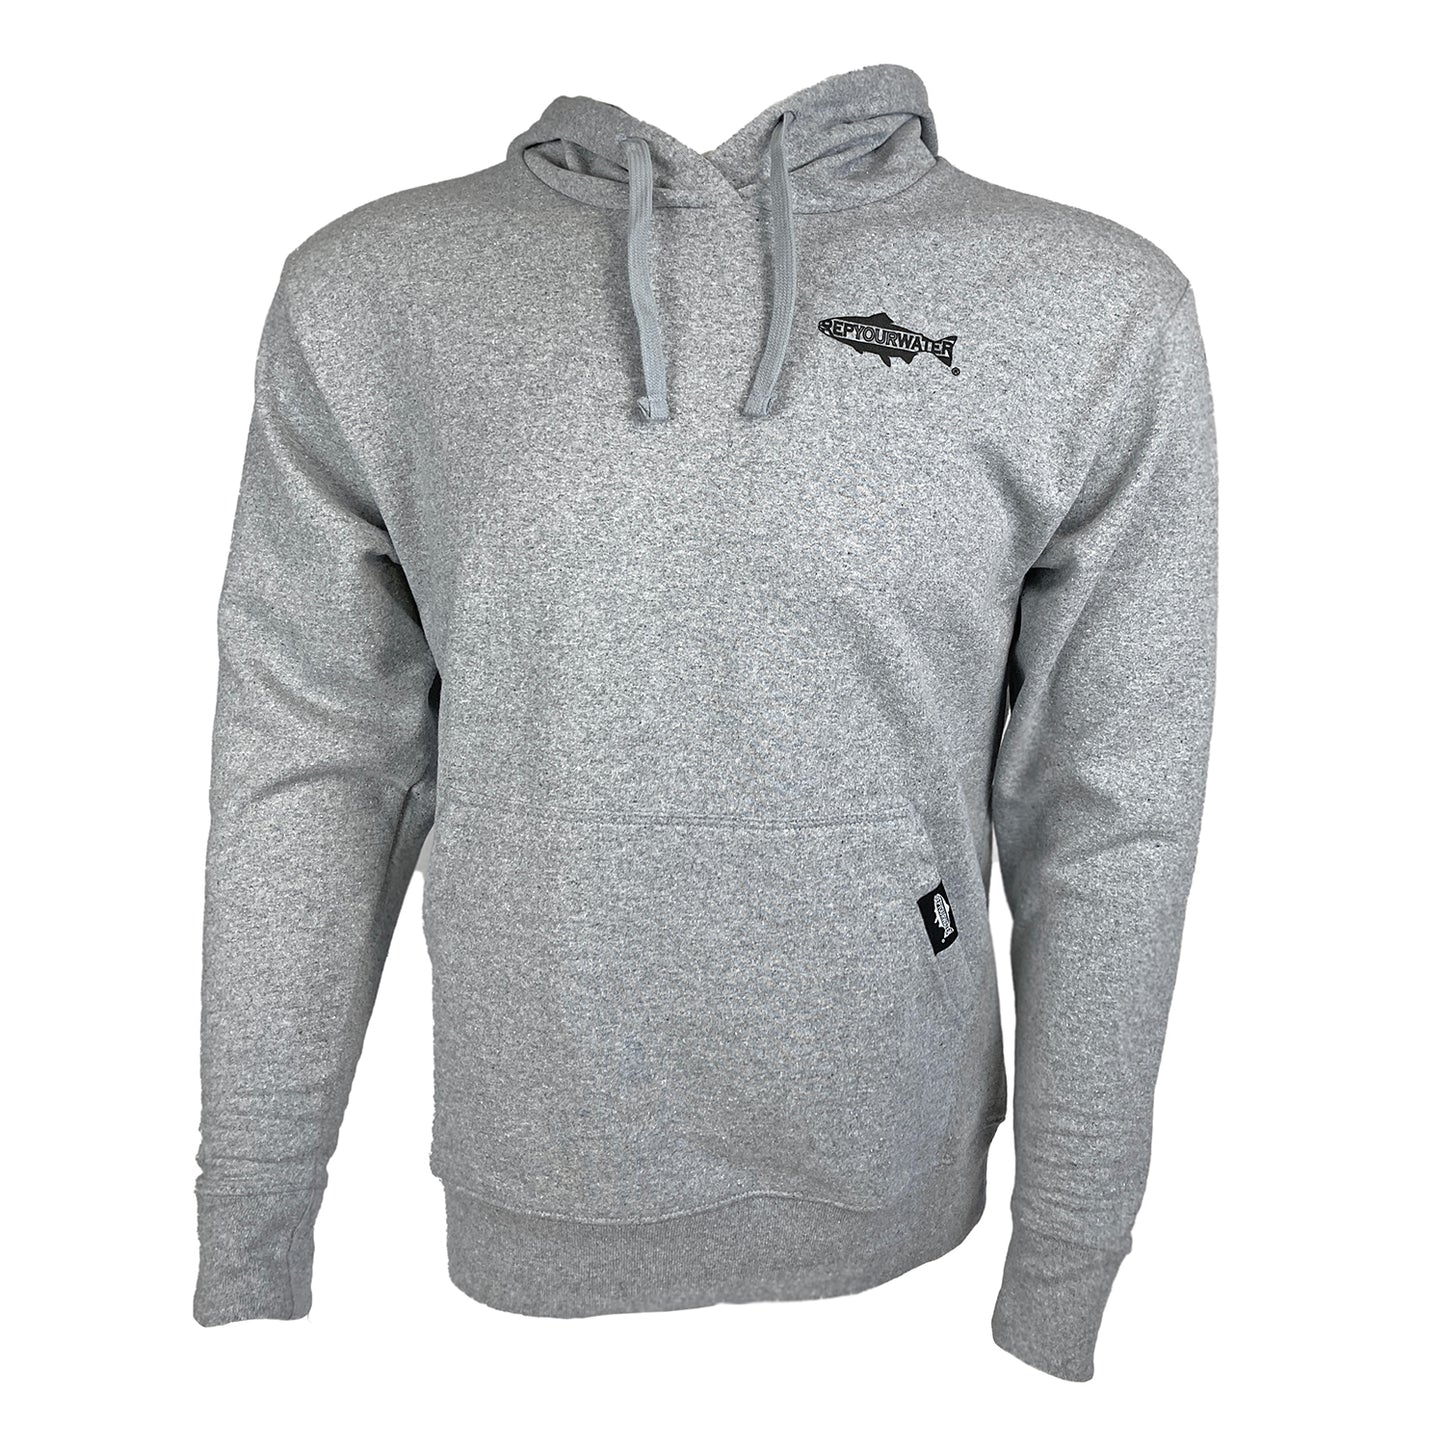 Gray hoody shown from the front with Rep Your Water logo on wearer's left chest.